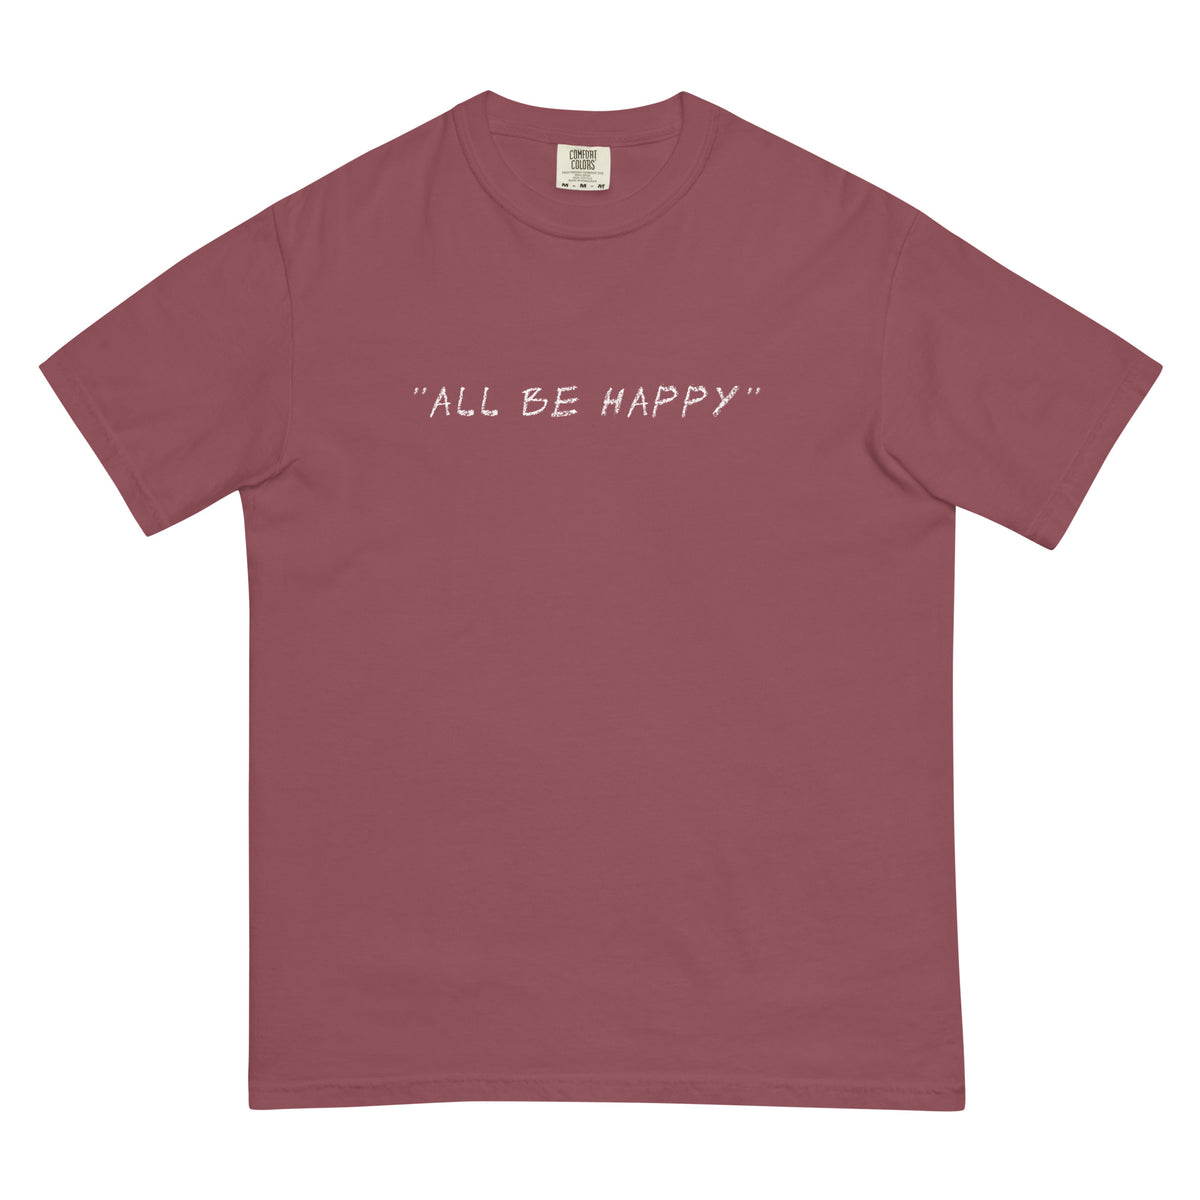 All Be Happy Heritage Garment-Dyed Tee